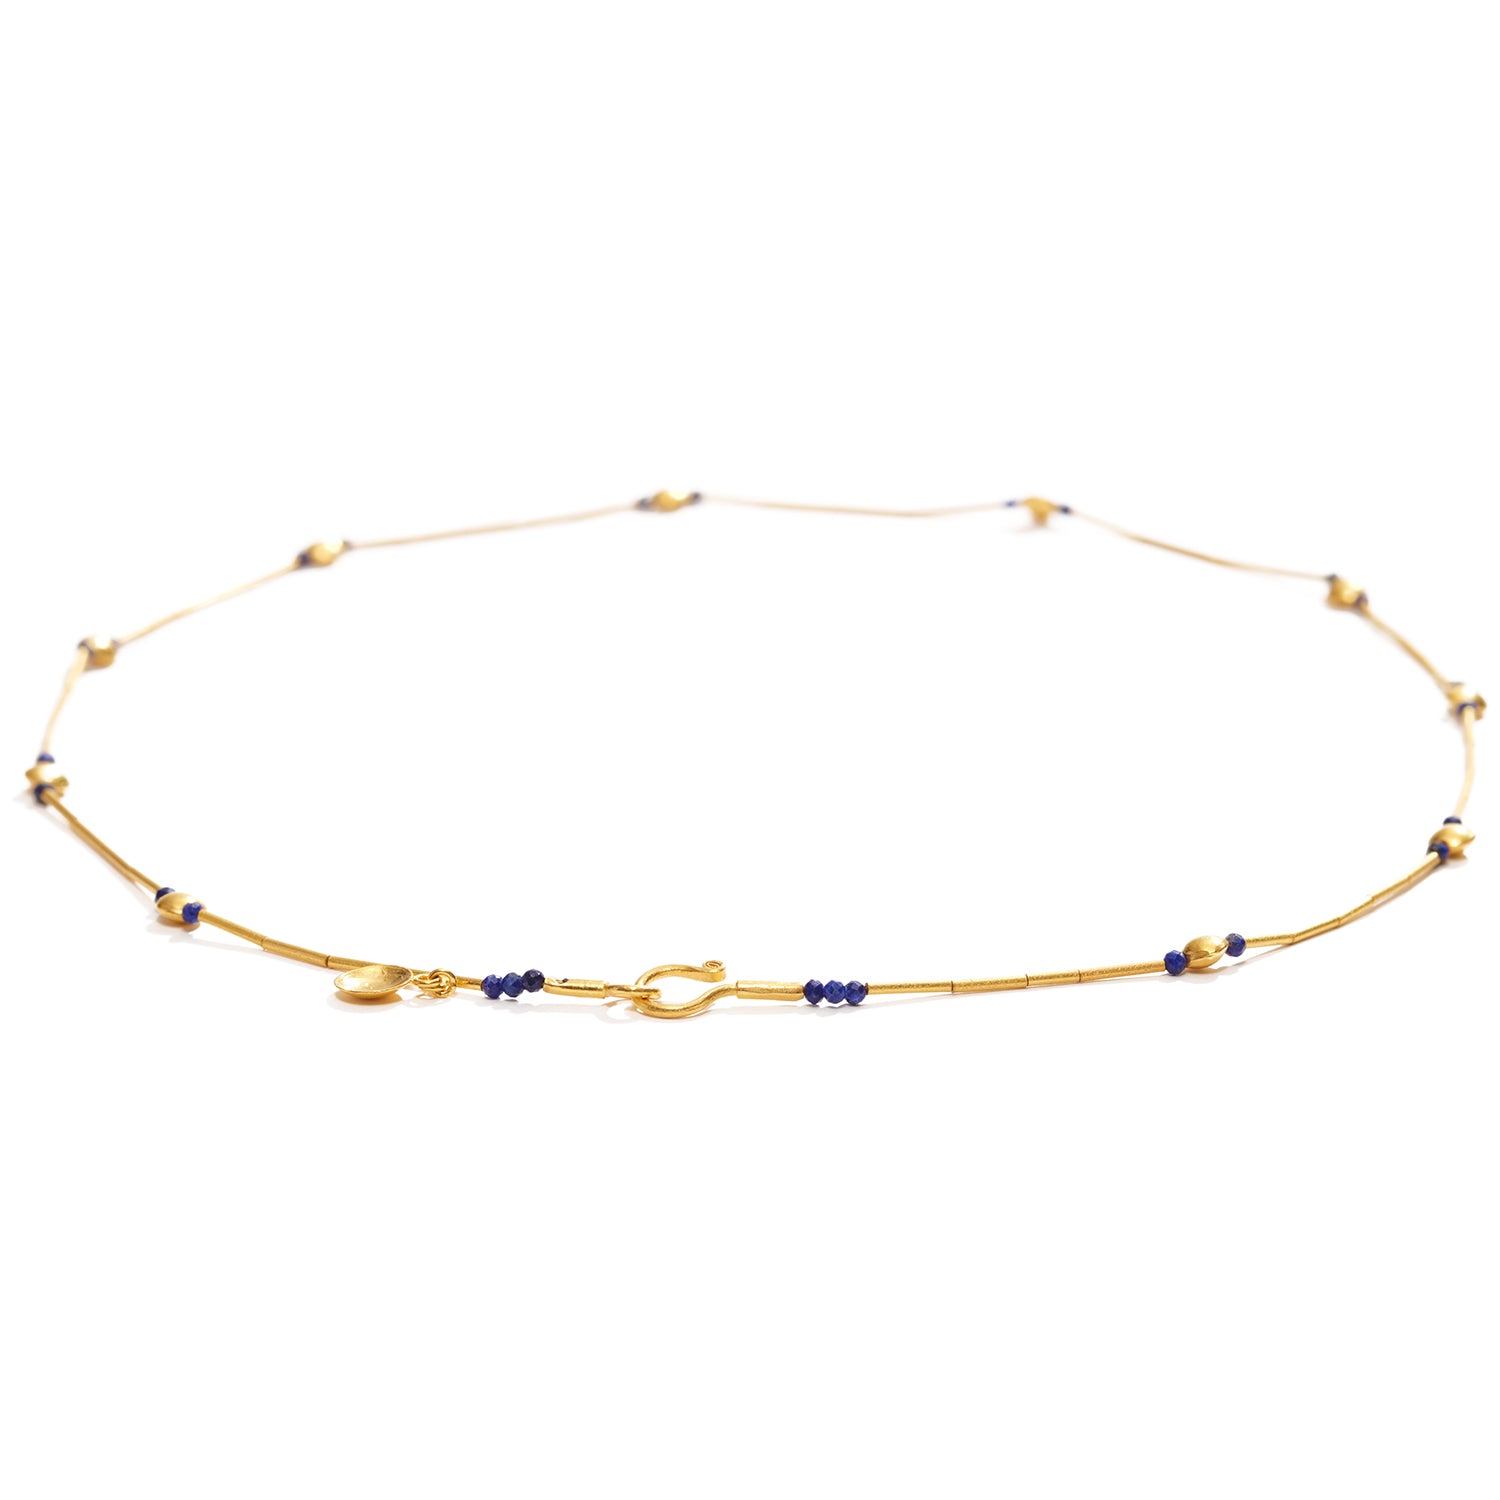 Gold and Lapis Necklace